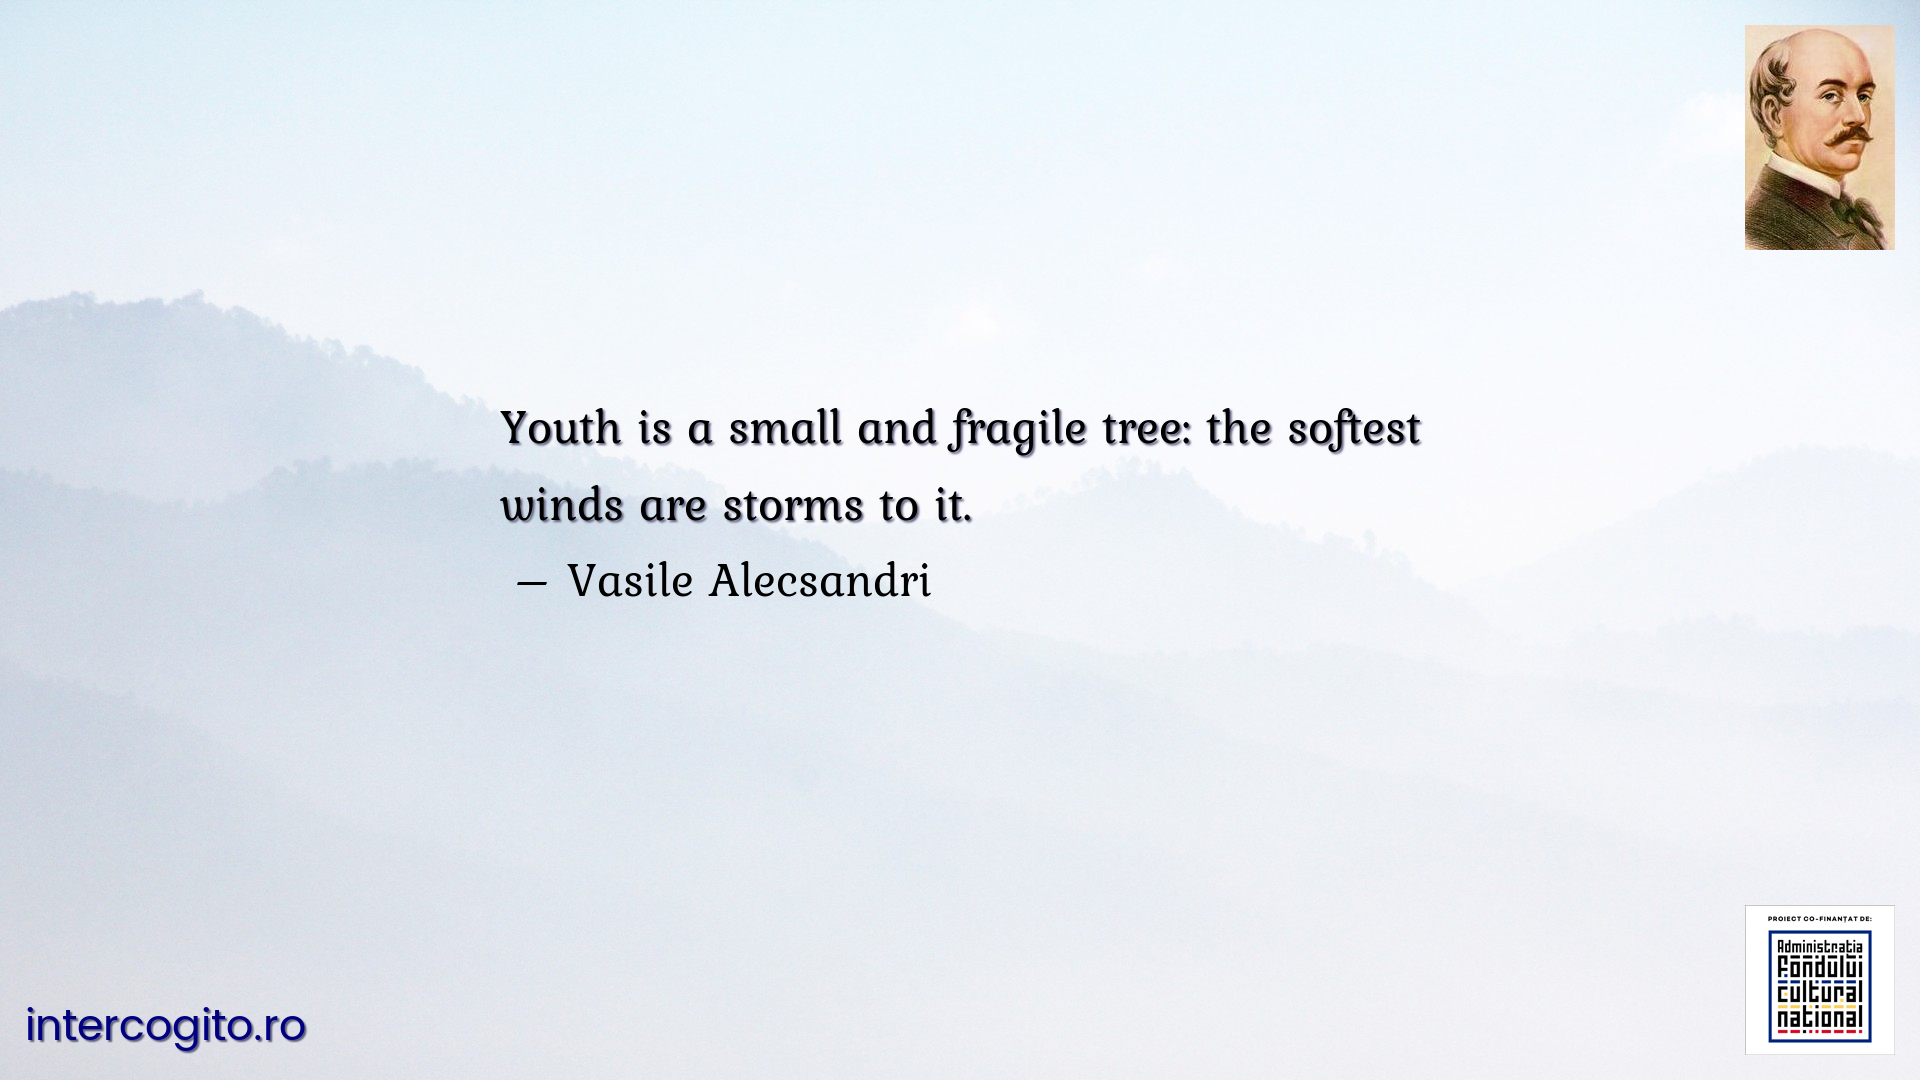 Youth is a small and fragile tree: the softest winds are storms to it.